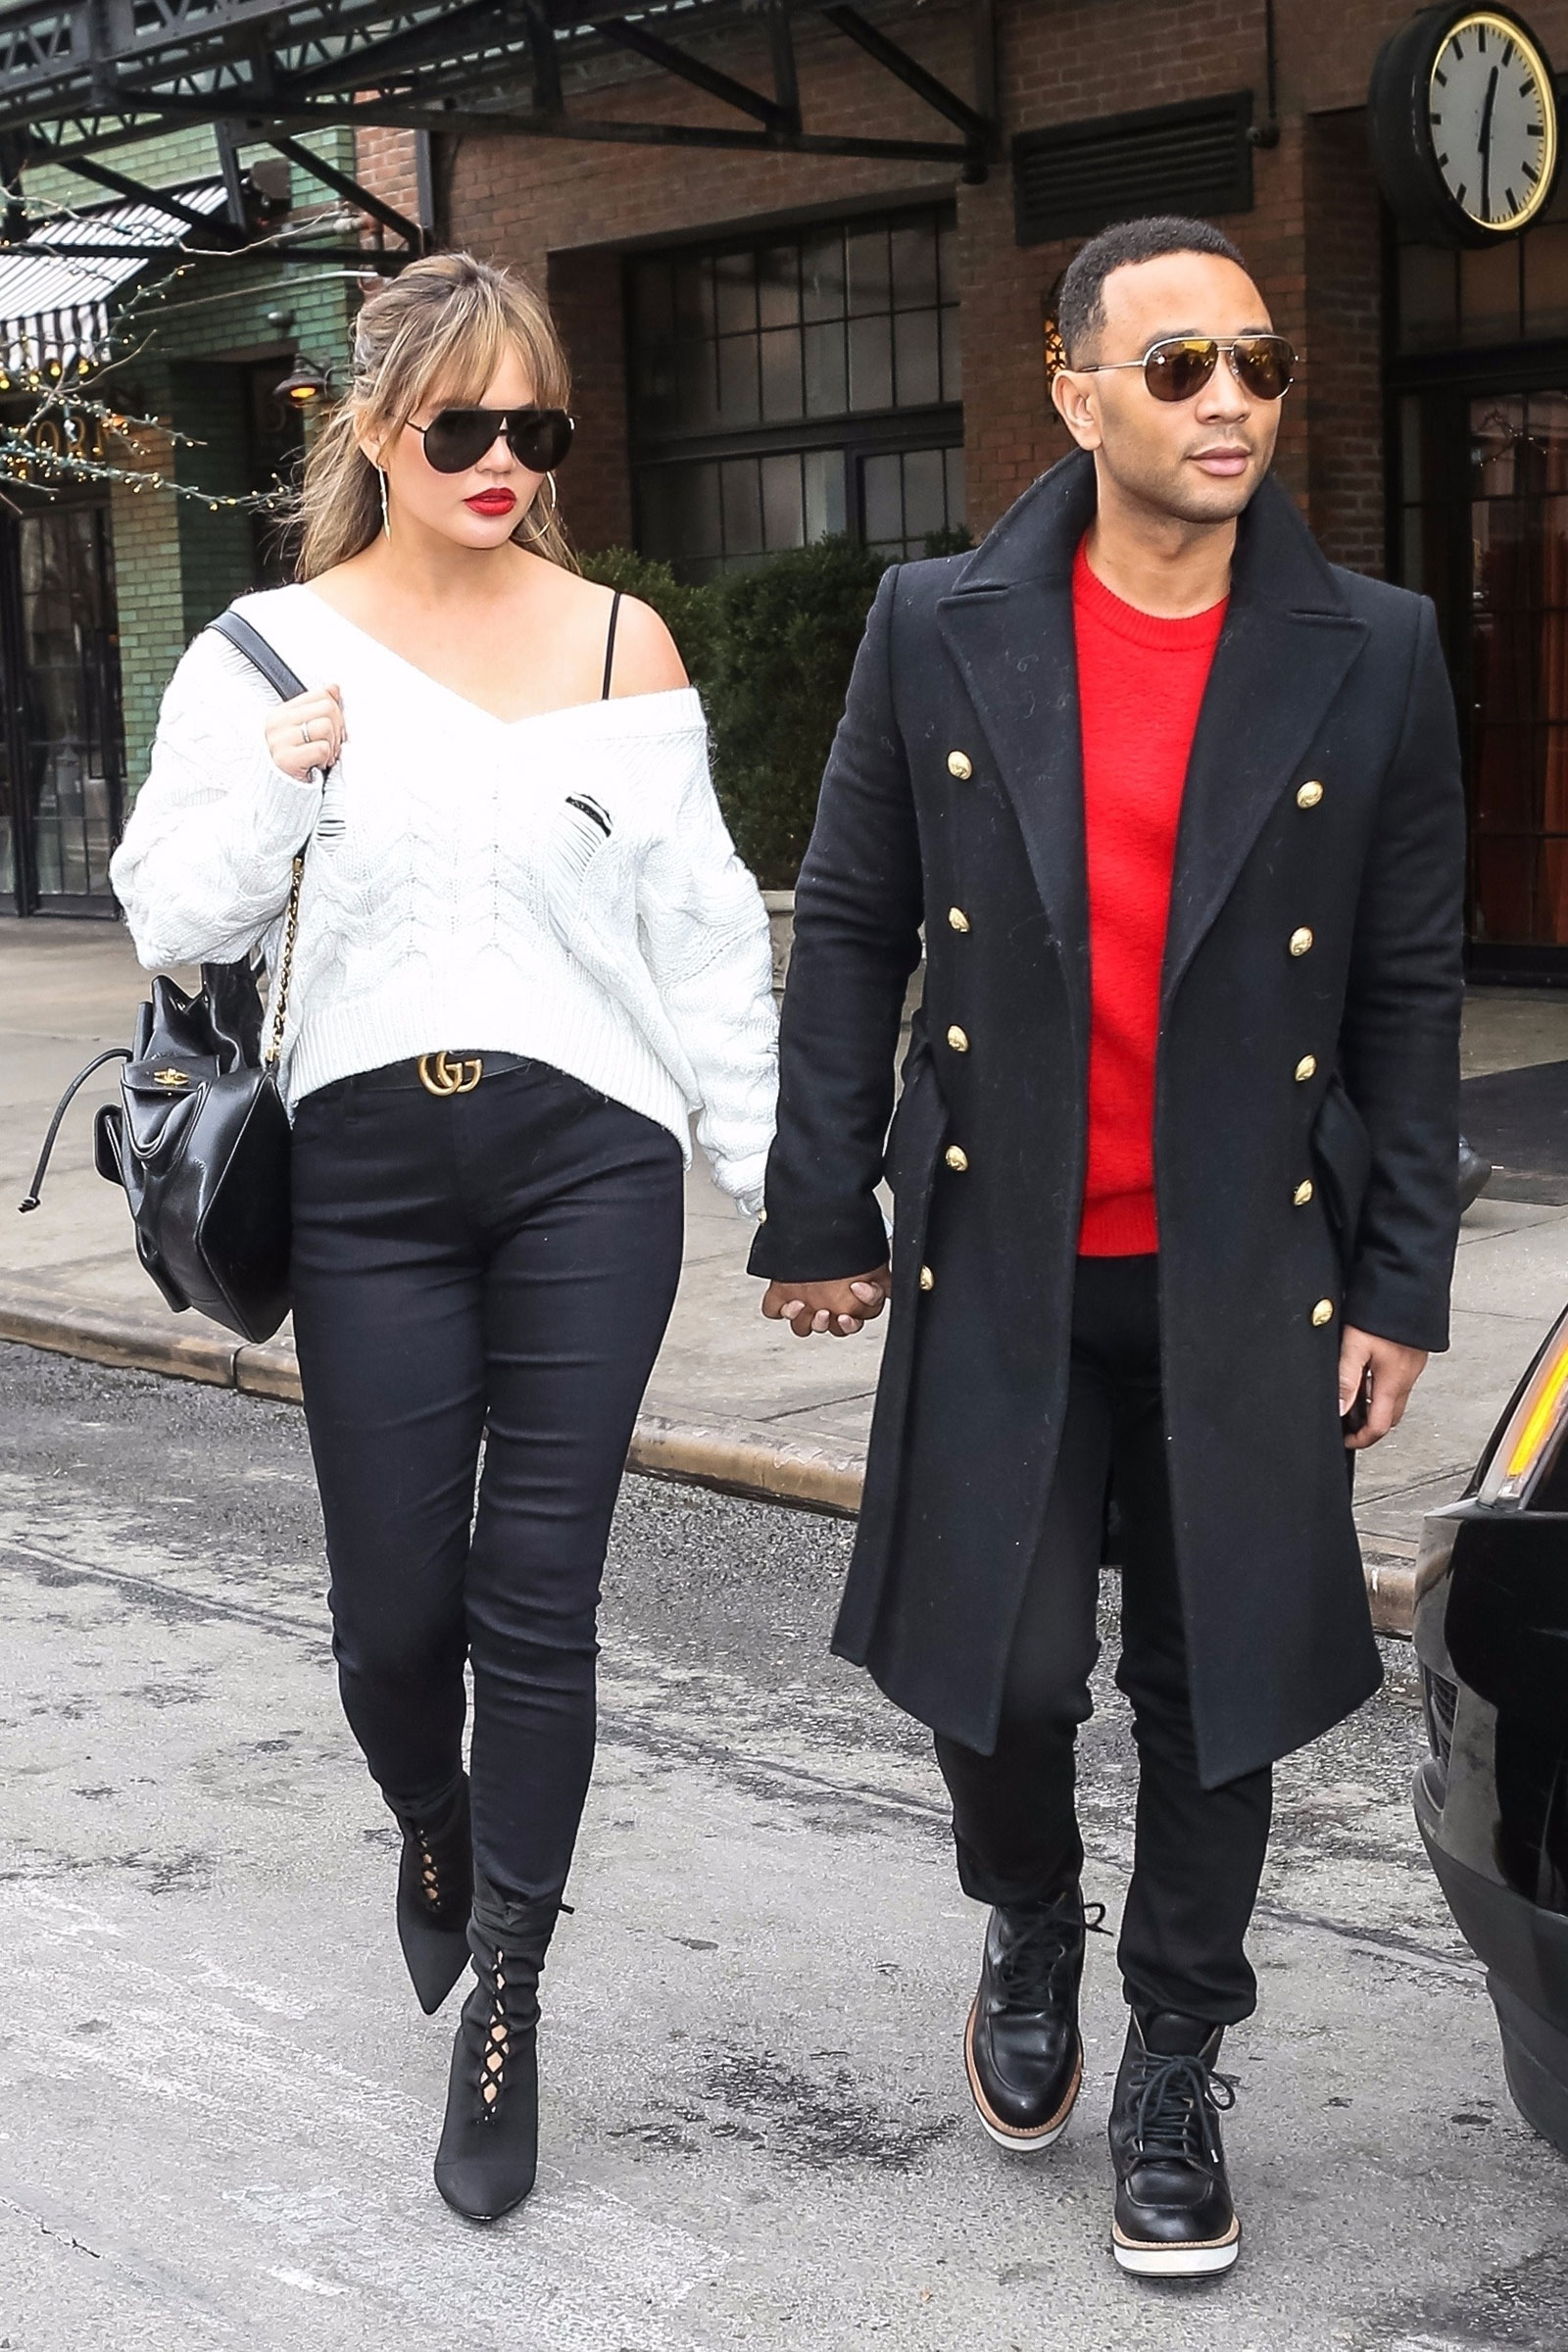 Chrissy Teigen wears a distressed white v-neck sweater with black skinny jeans and black lace-up ankle boots.